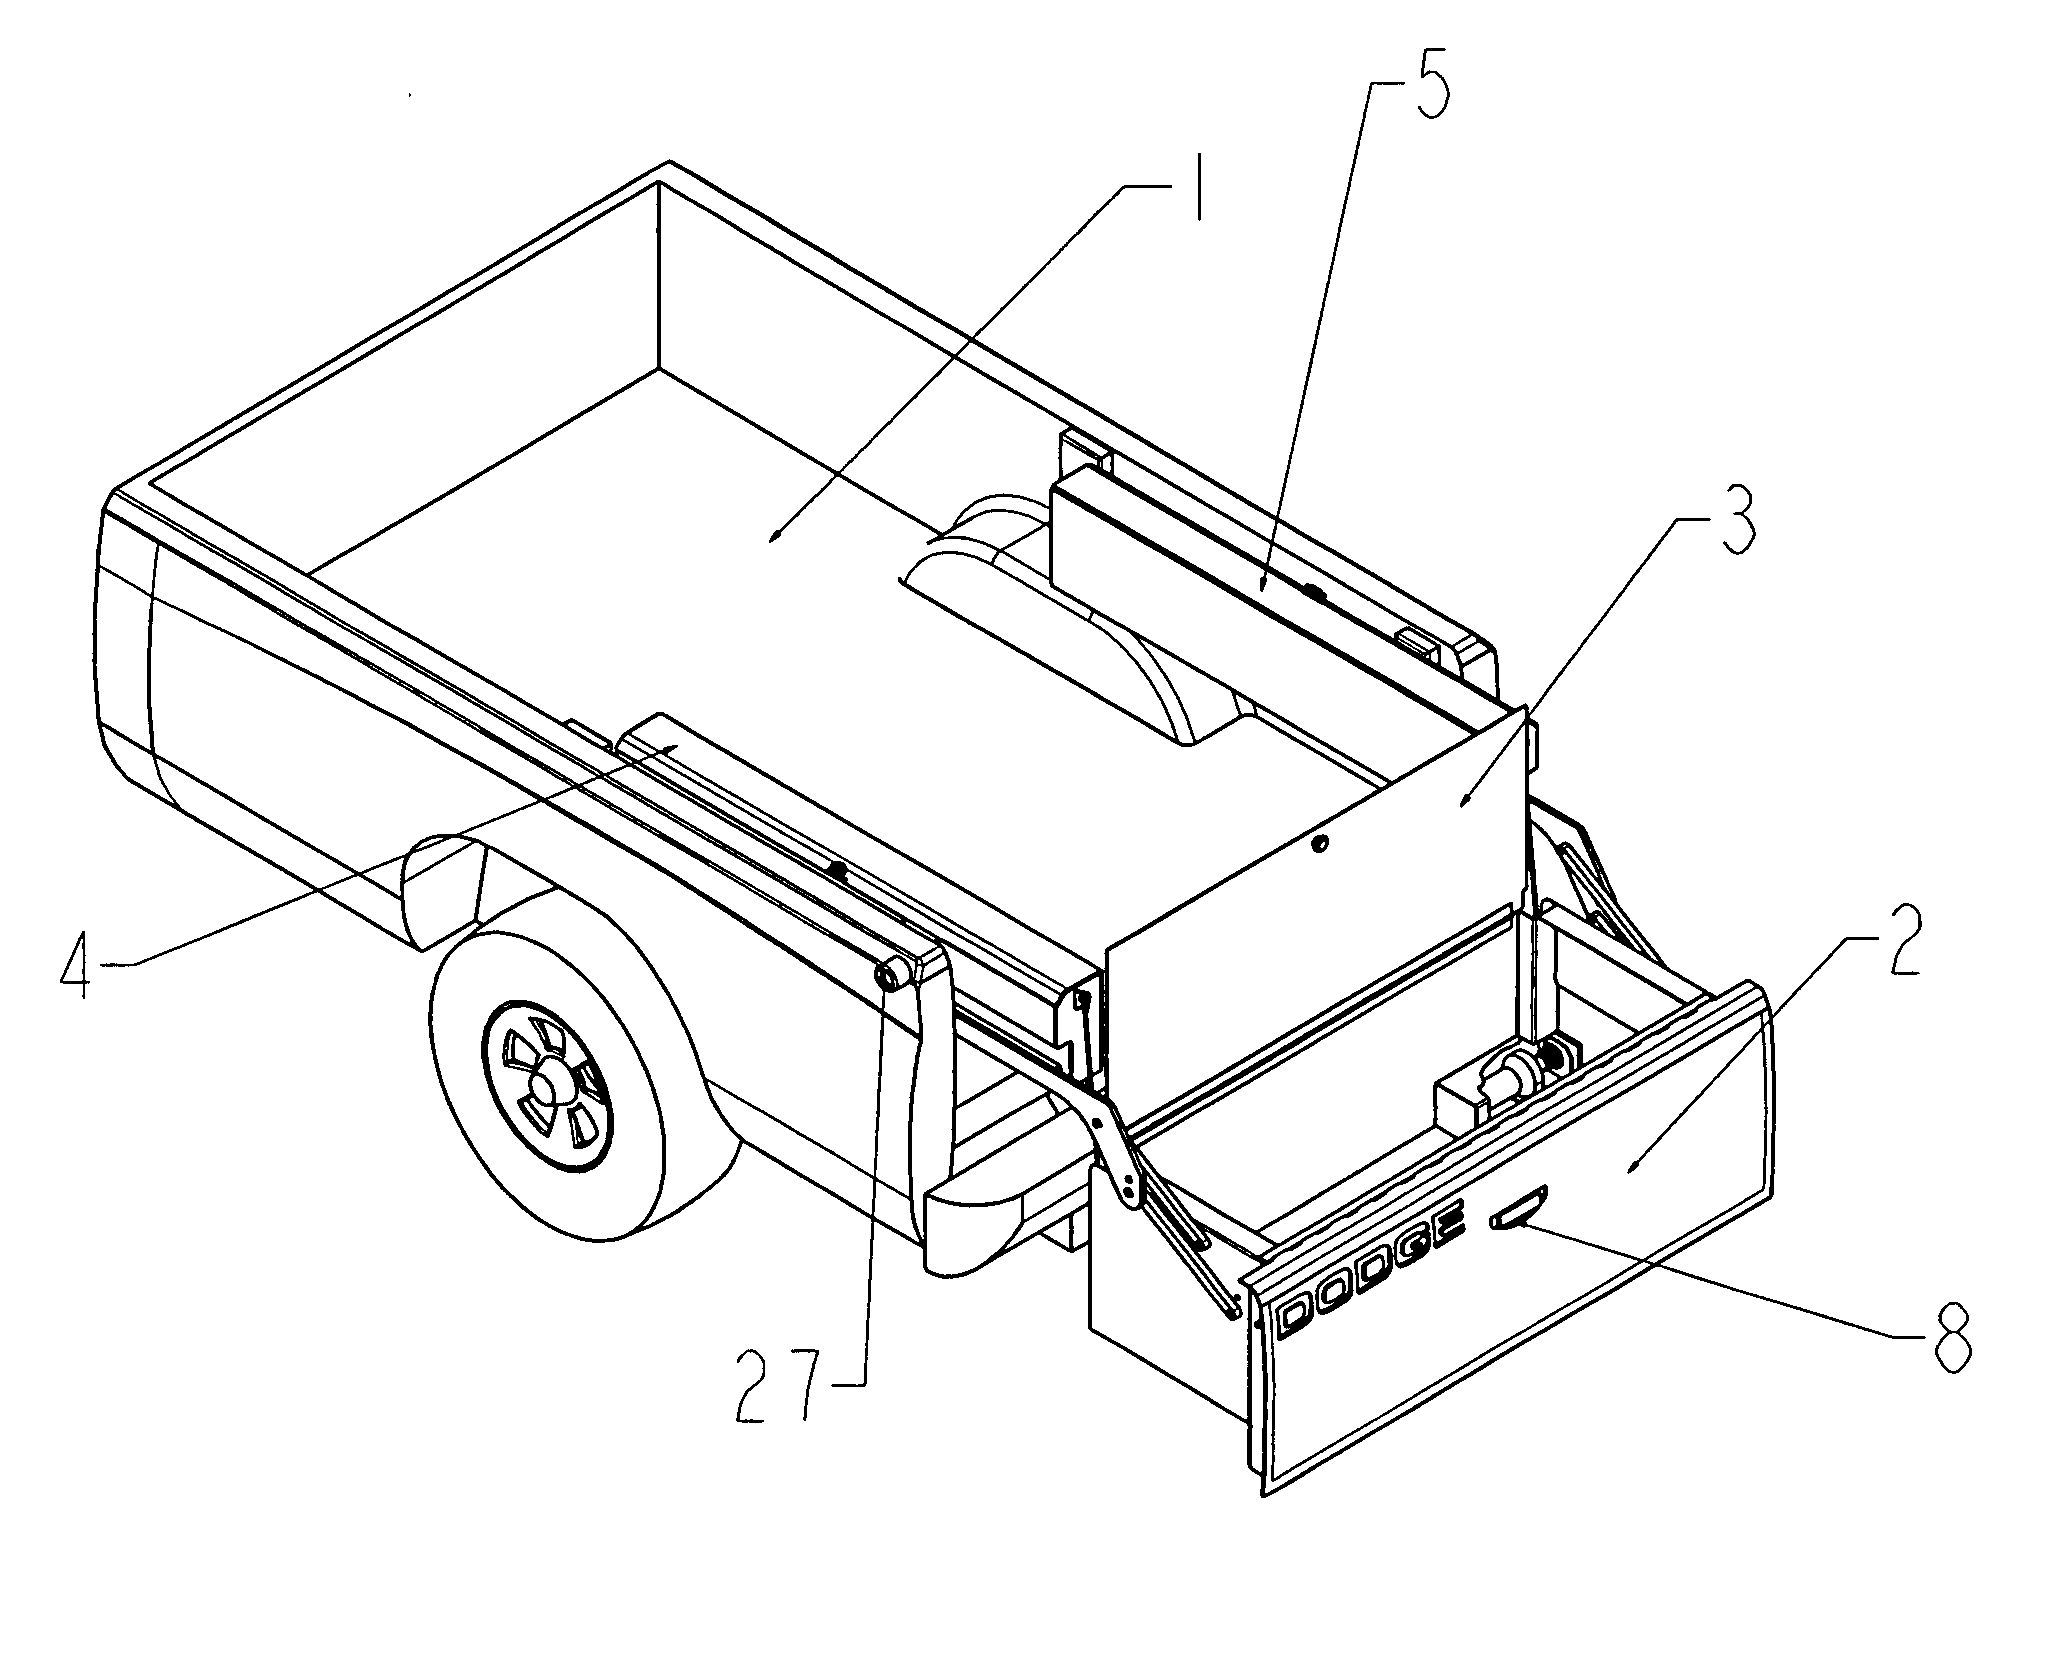 Truck storage and work surface tailgate